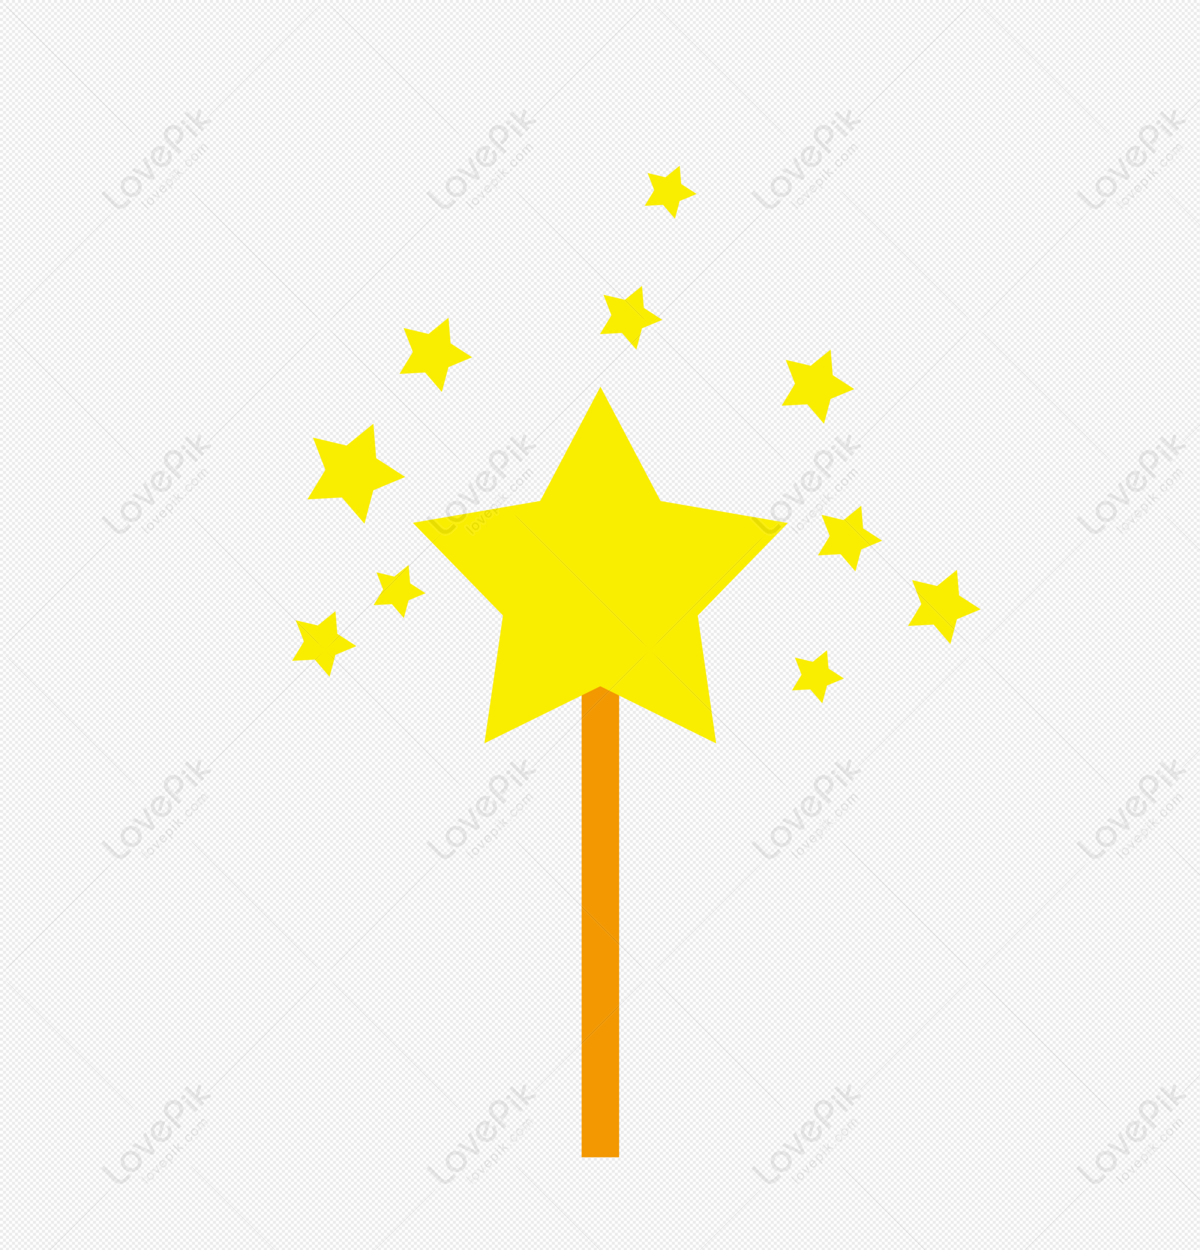 Magic Wand PNG Transparent Image And Clipart Image For Free Download -  Lovepik | 401225297